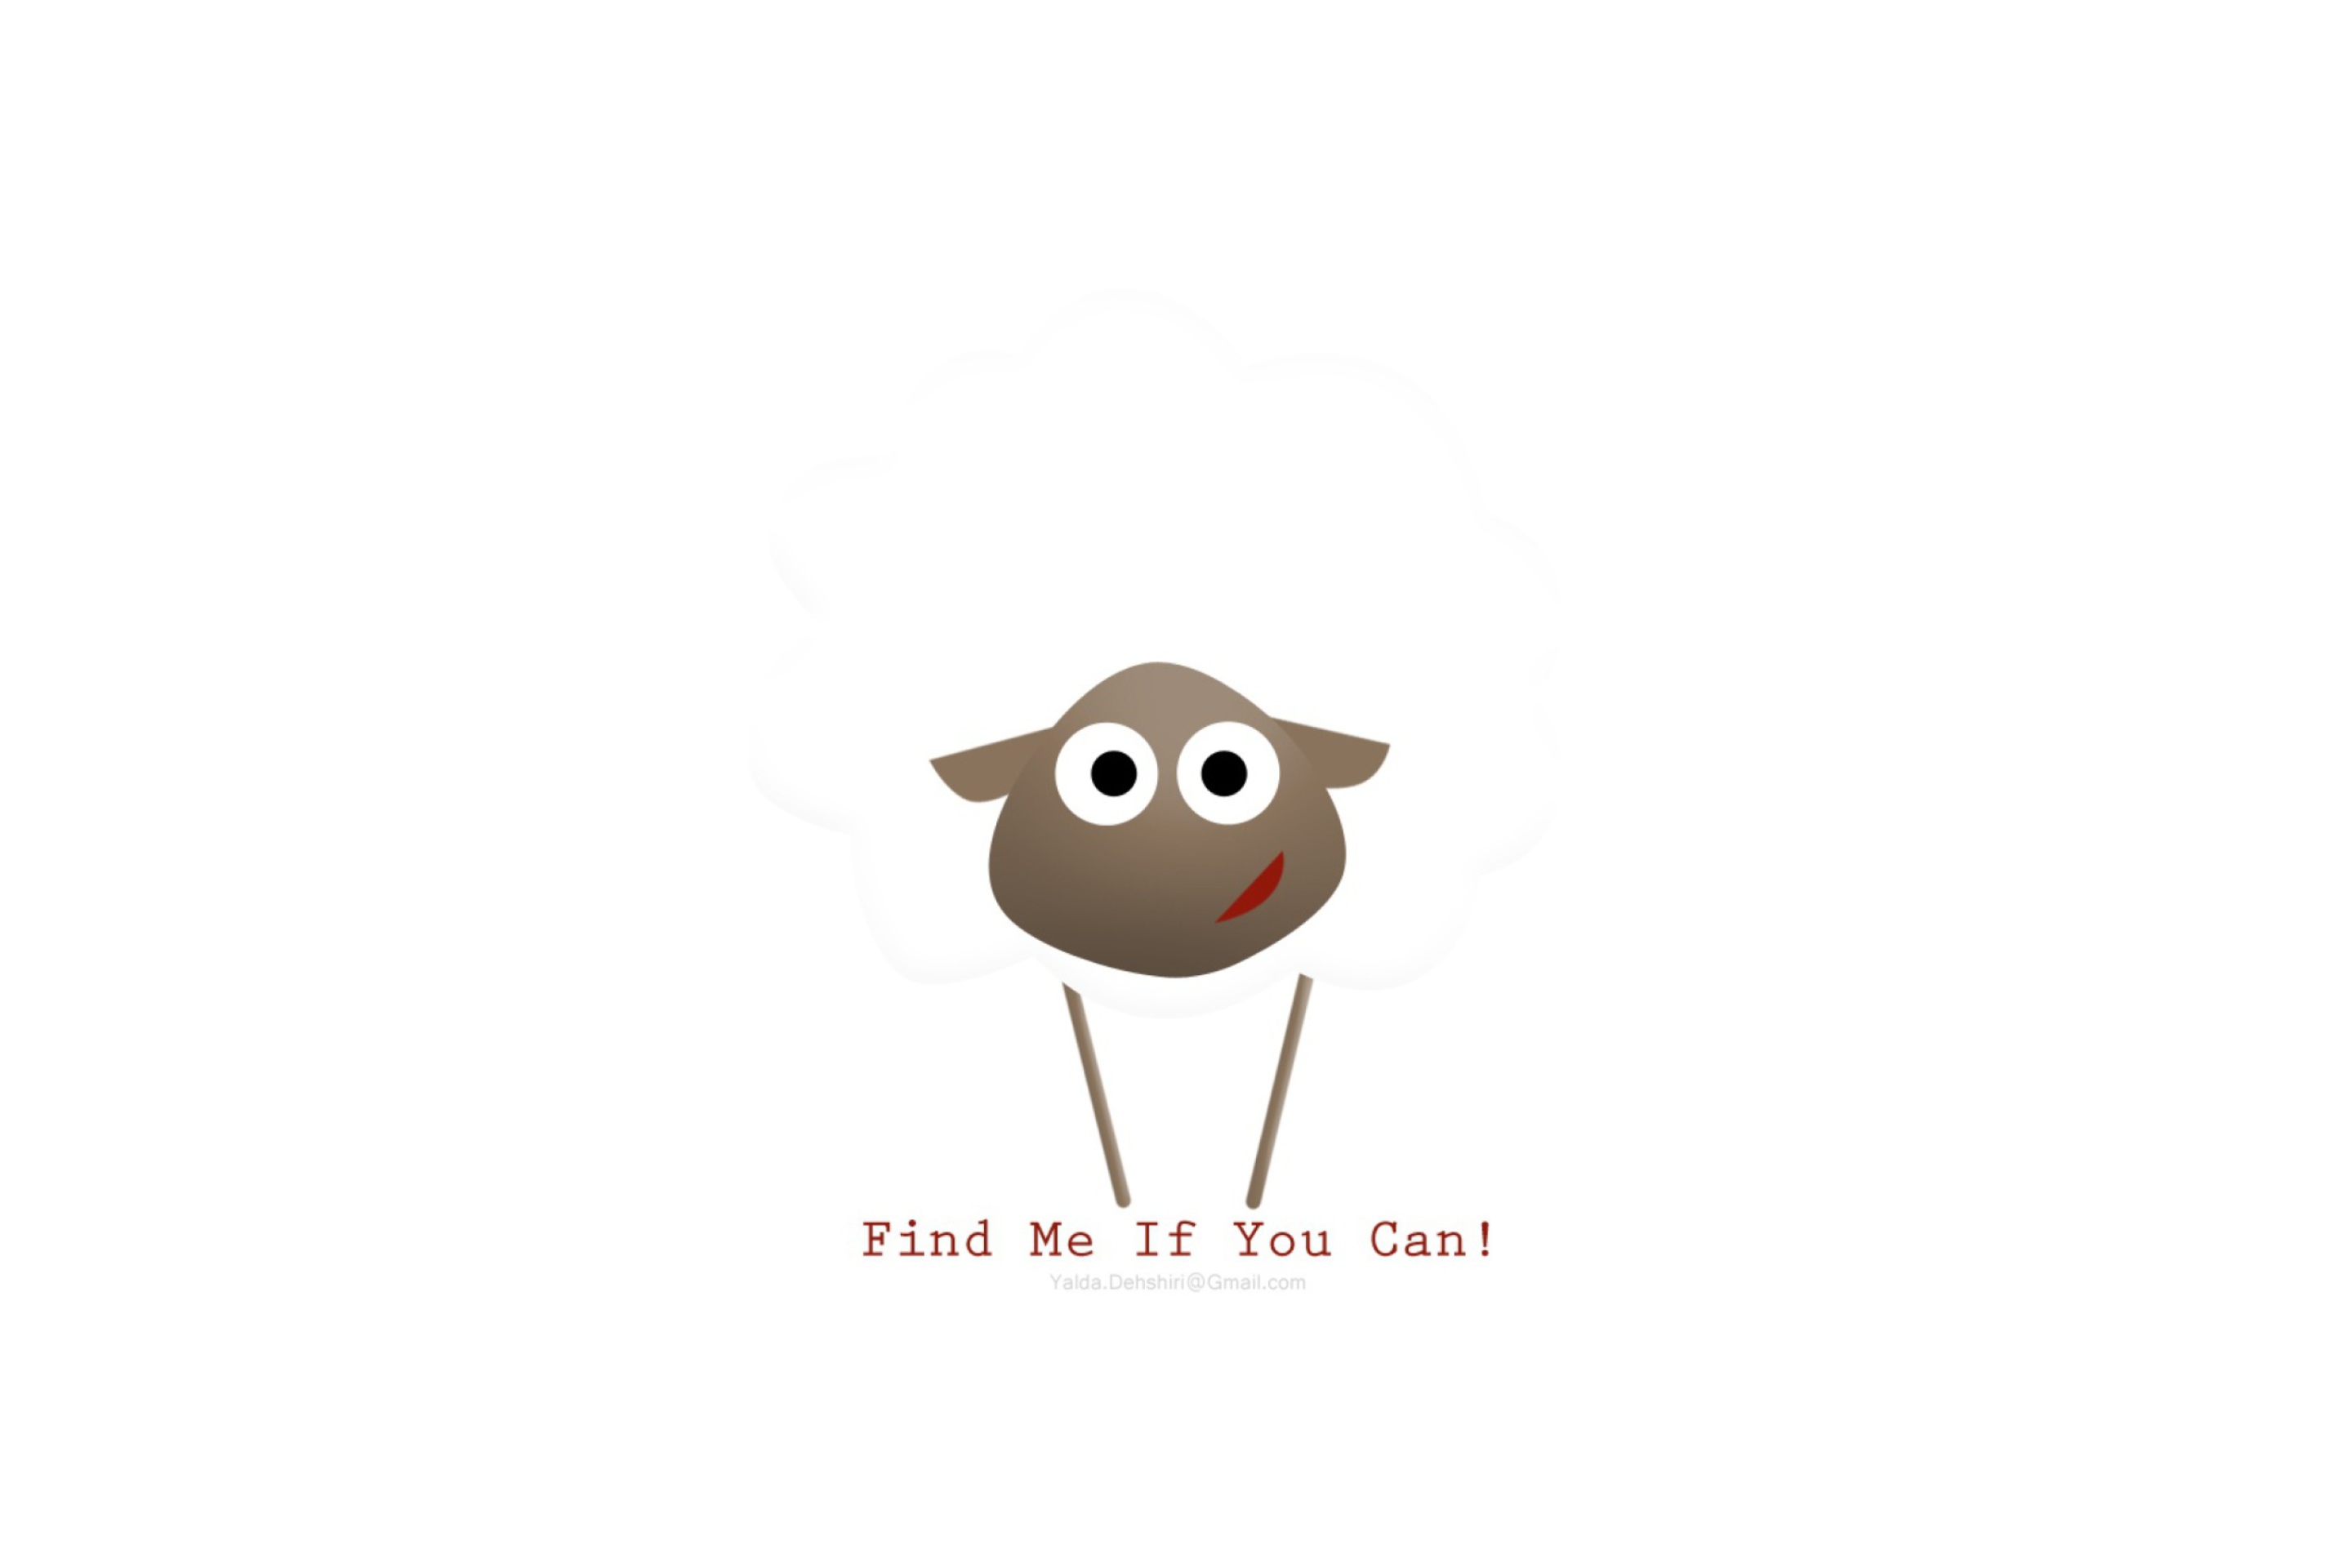 Обои Find Me If You Can 2880x1920